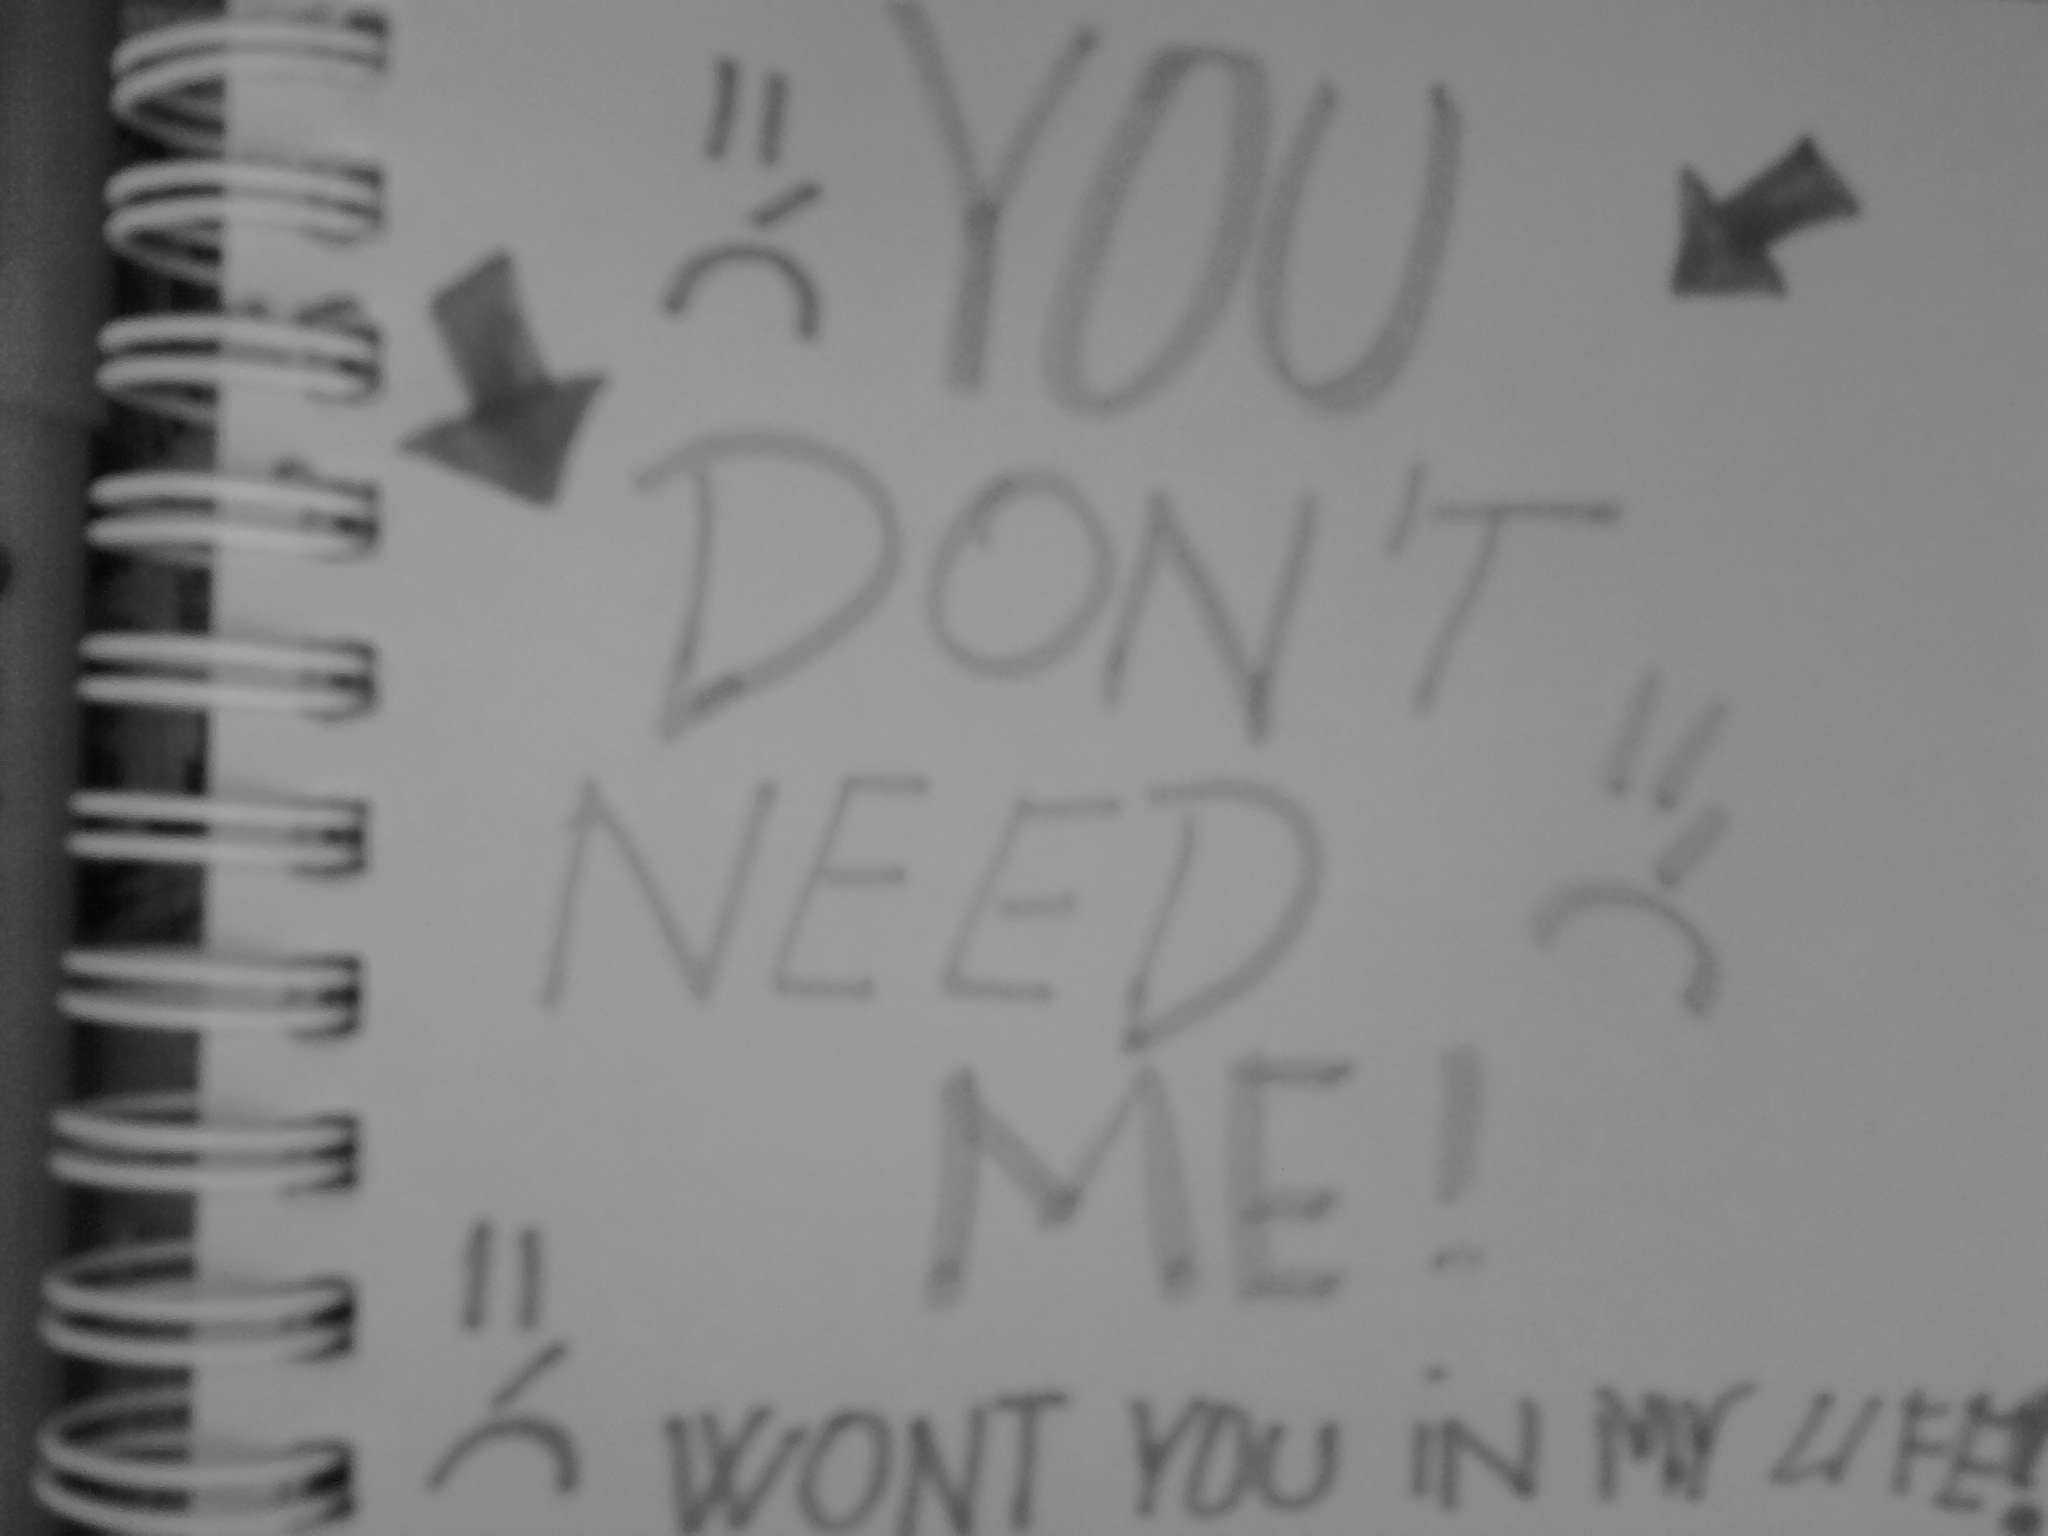 You don't need me